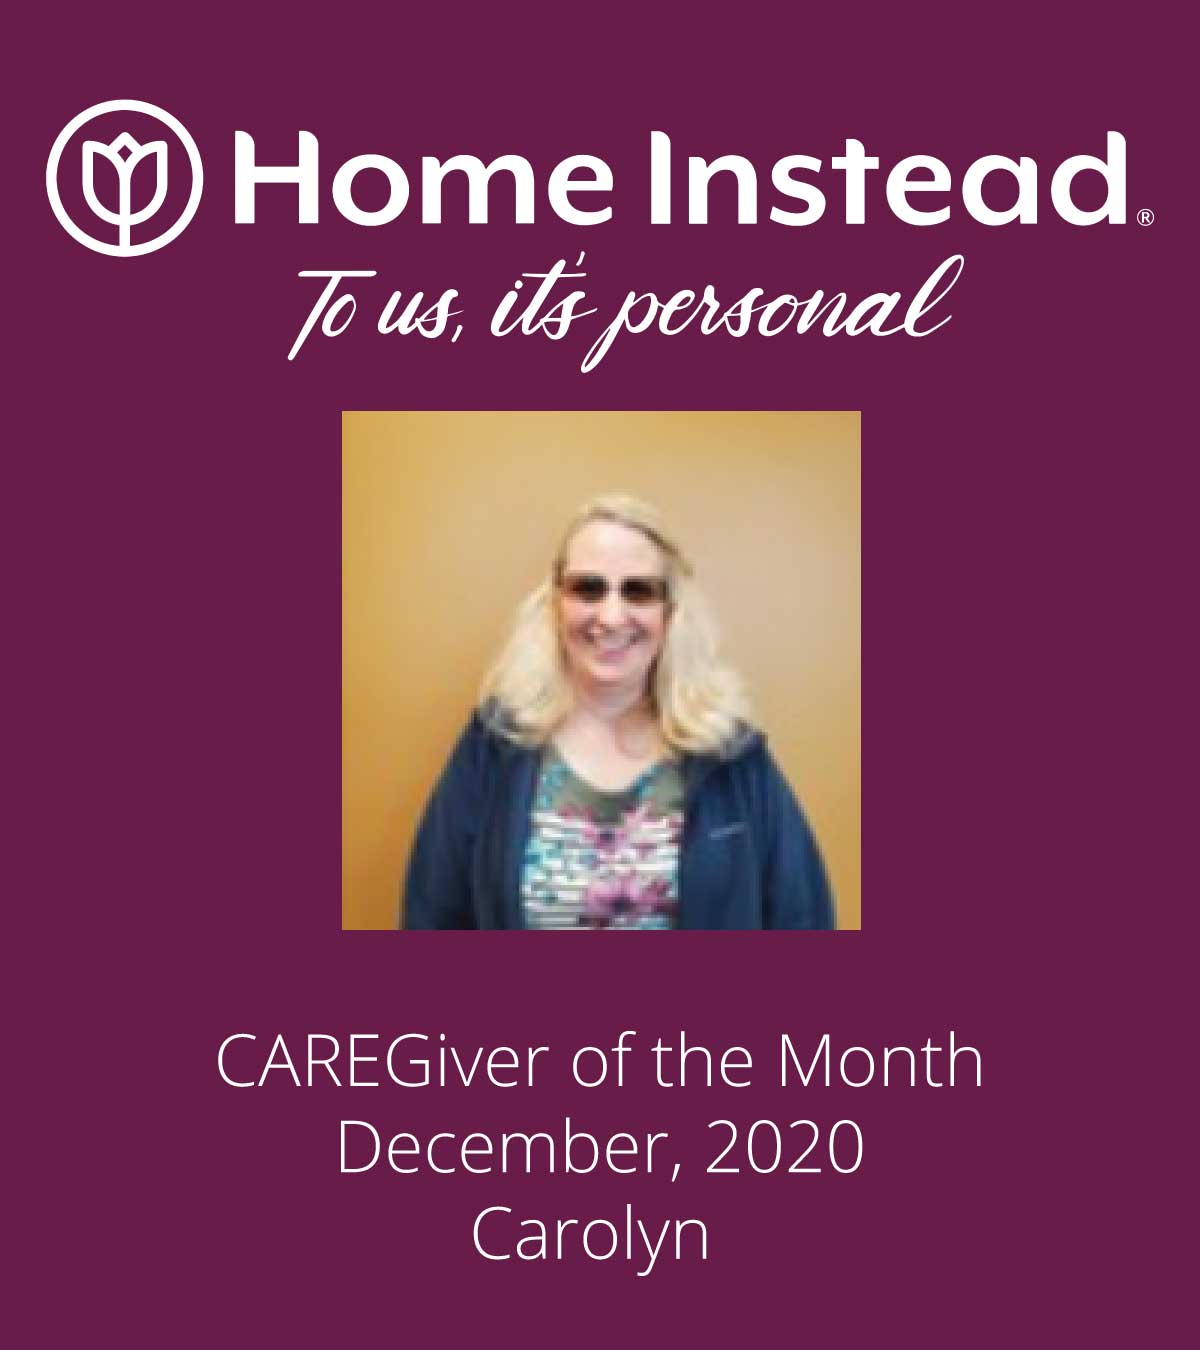 Home Instead Caregiver of the Month Carolyn